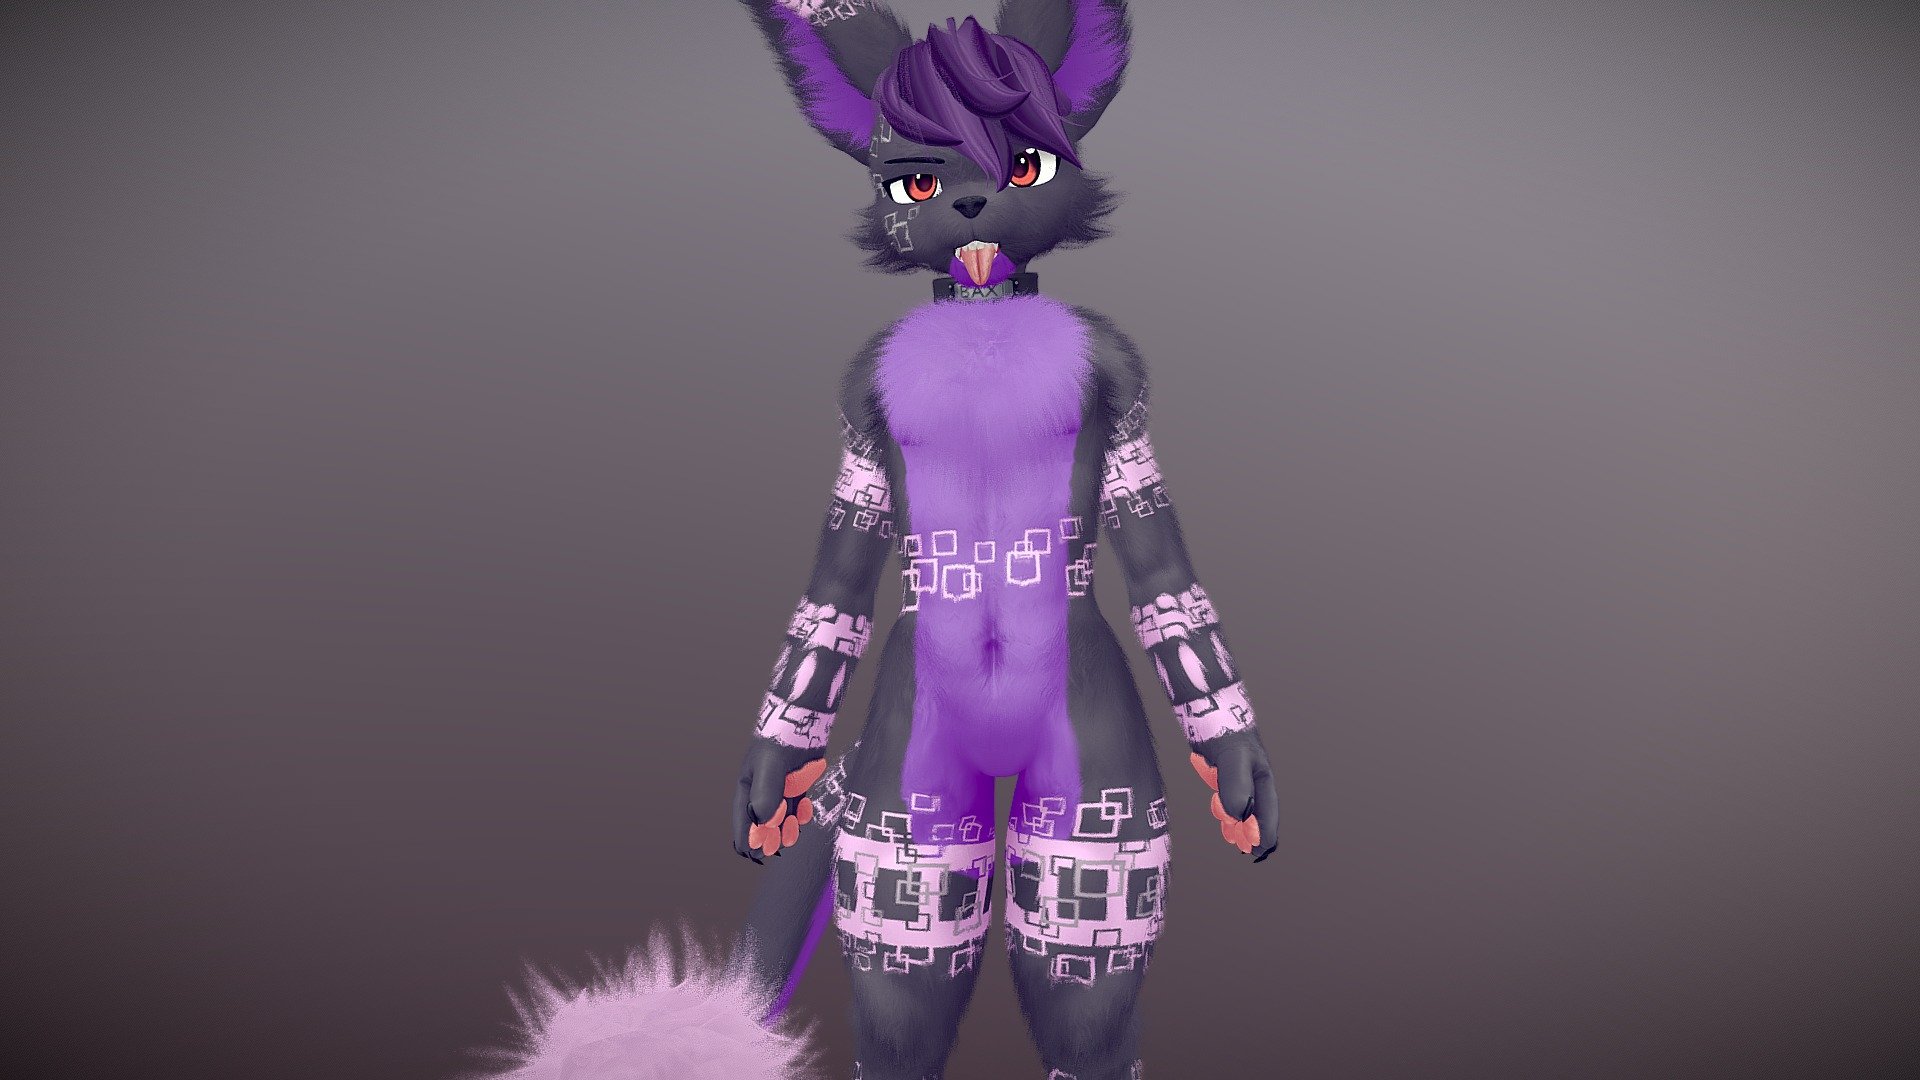 commission info: https://www.furaffinity.net/commissions/hickysnow/ - Baxter - 3D model by HickySnow (@Hicky_Snow) 3d model